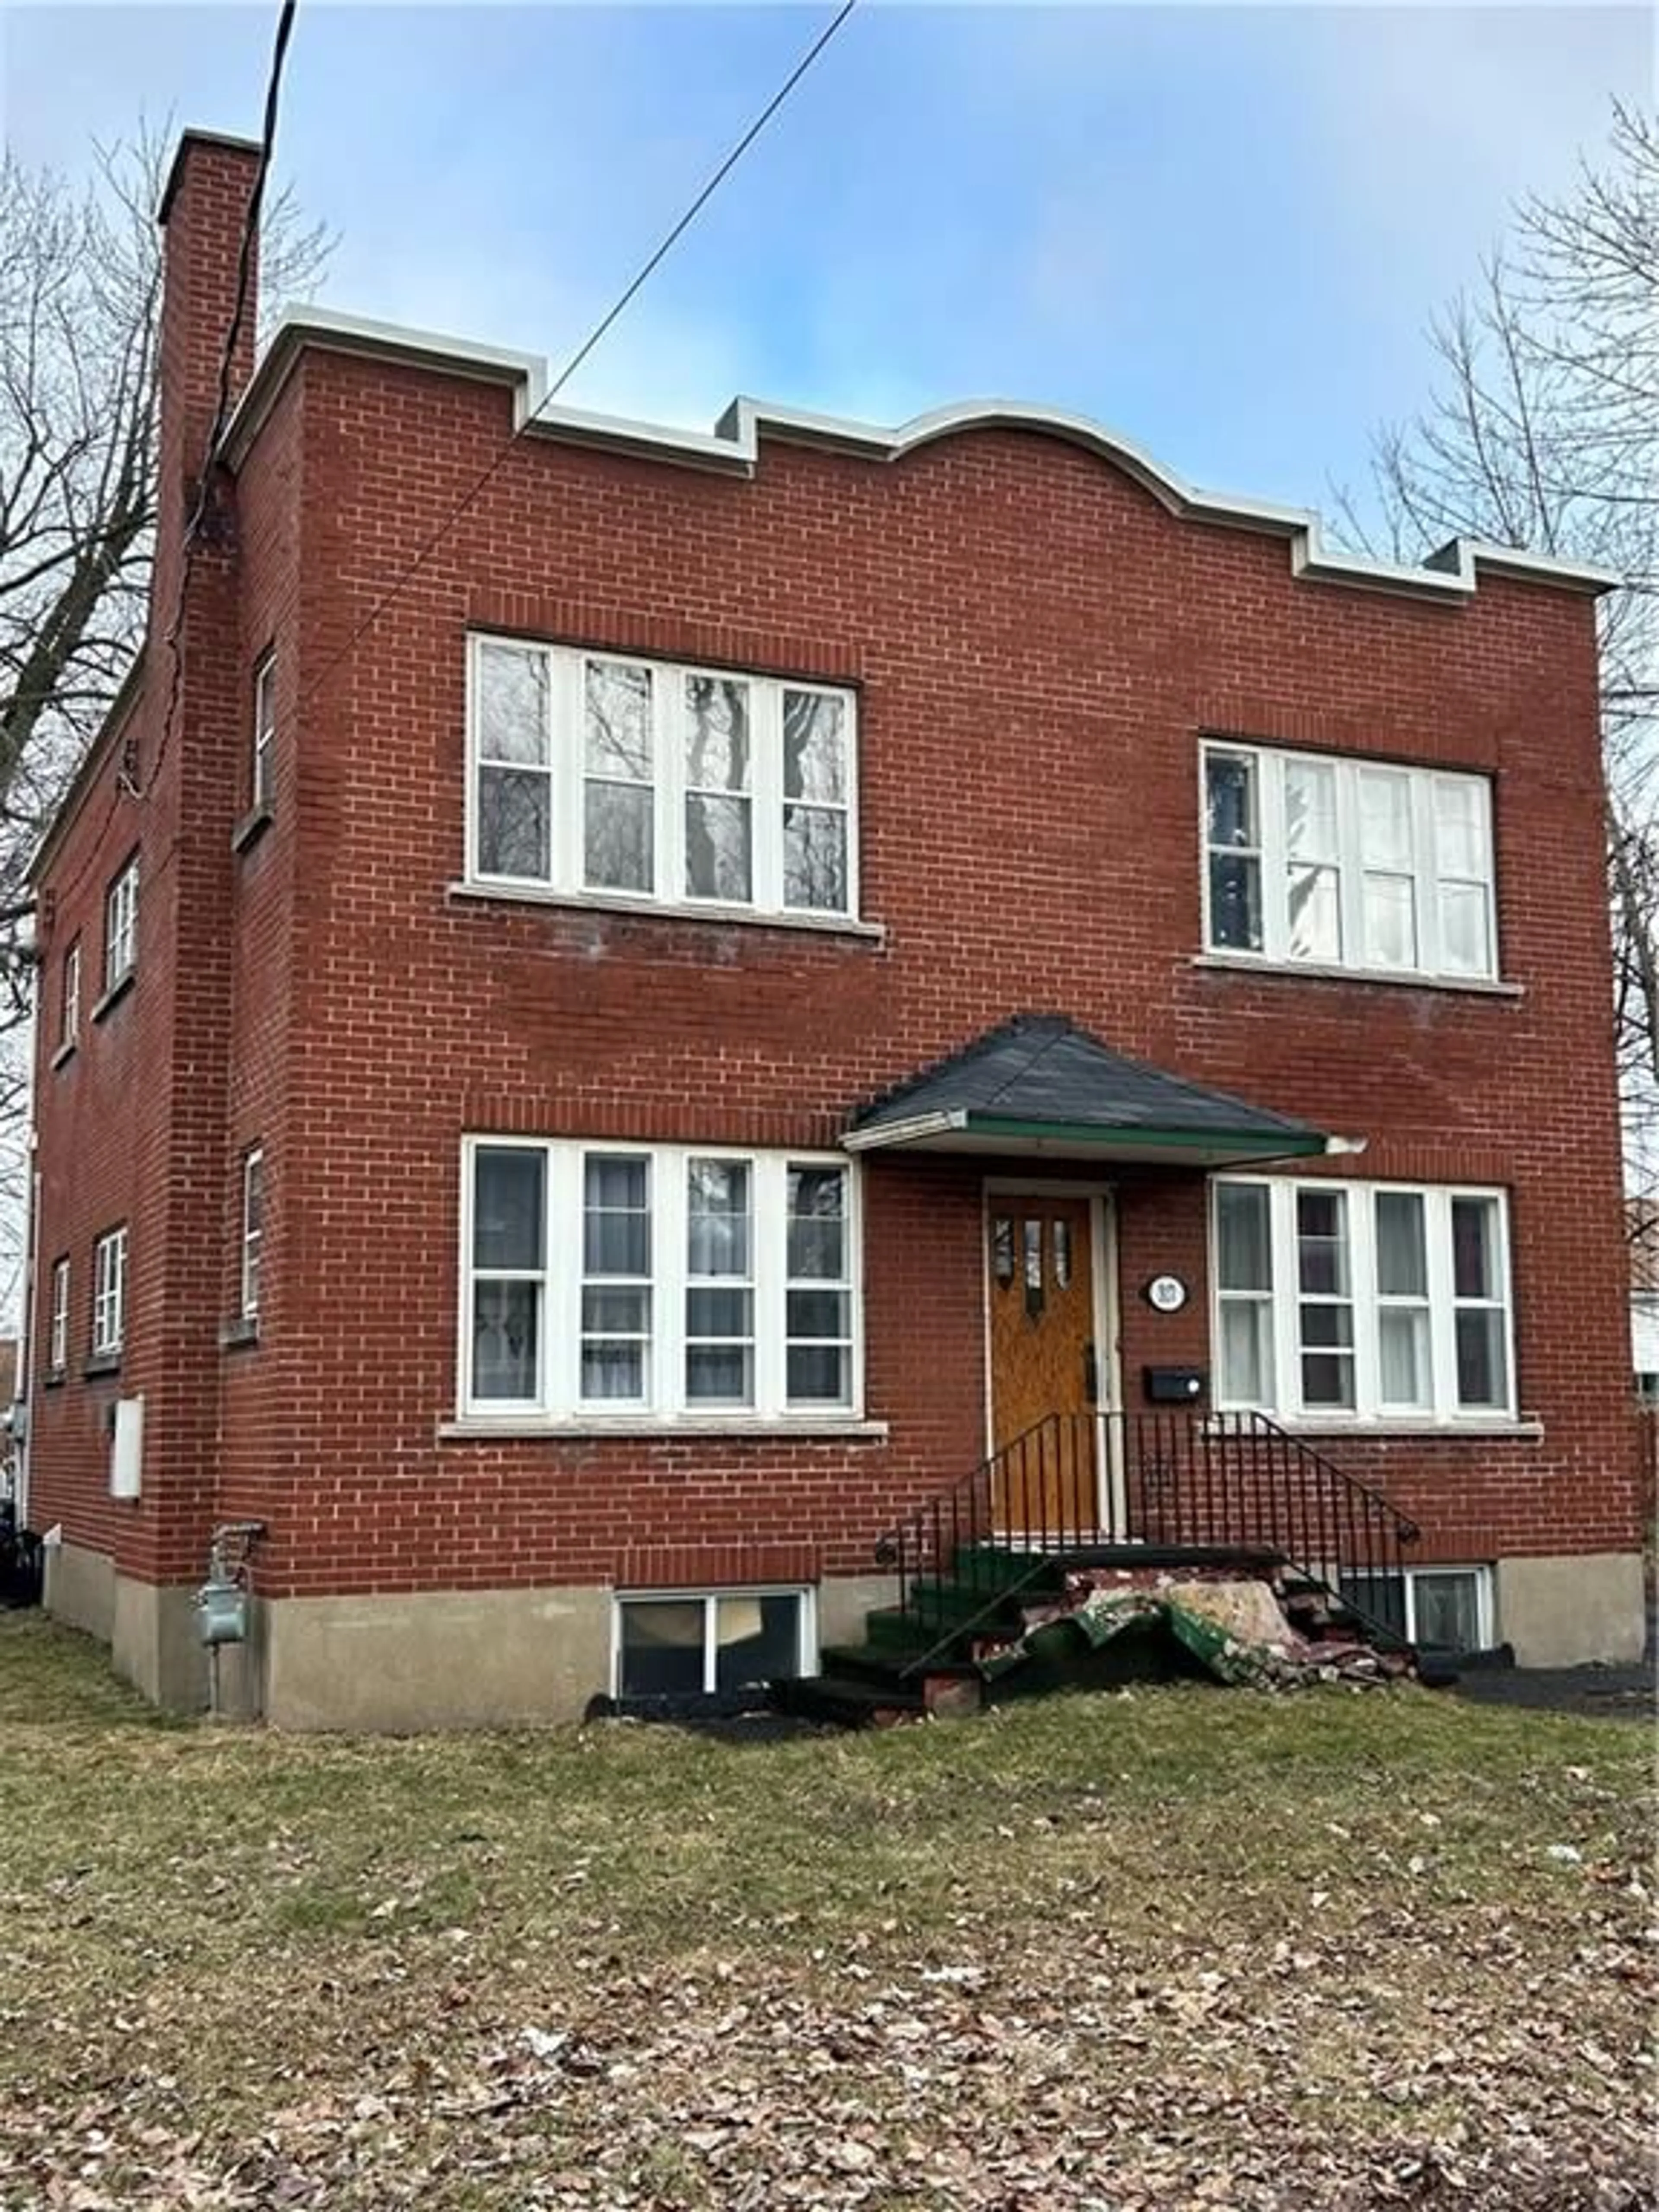 Home with brick exterior material for 317 AMELIA St, Cornwall Ontario K6H 3P4